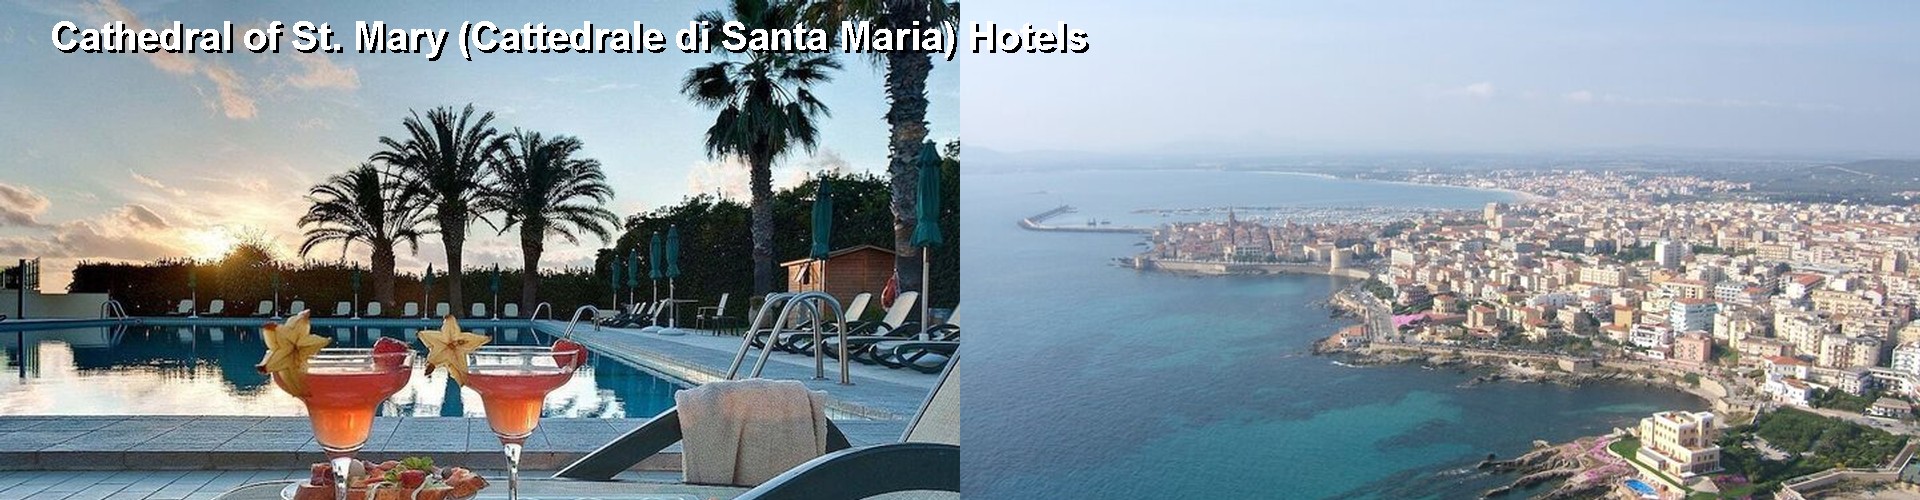 5 Best Hotels near Cathedral of St. Mary (Cattedrale di Santa Maria)